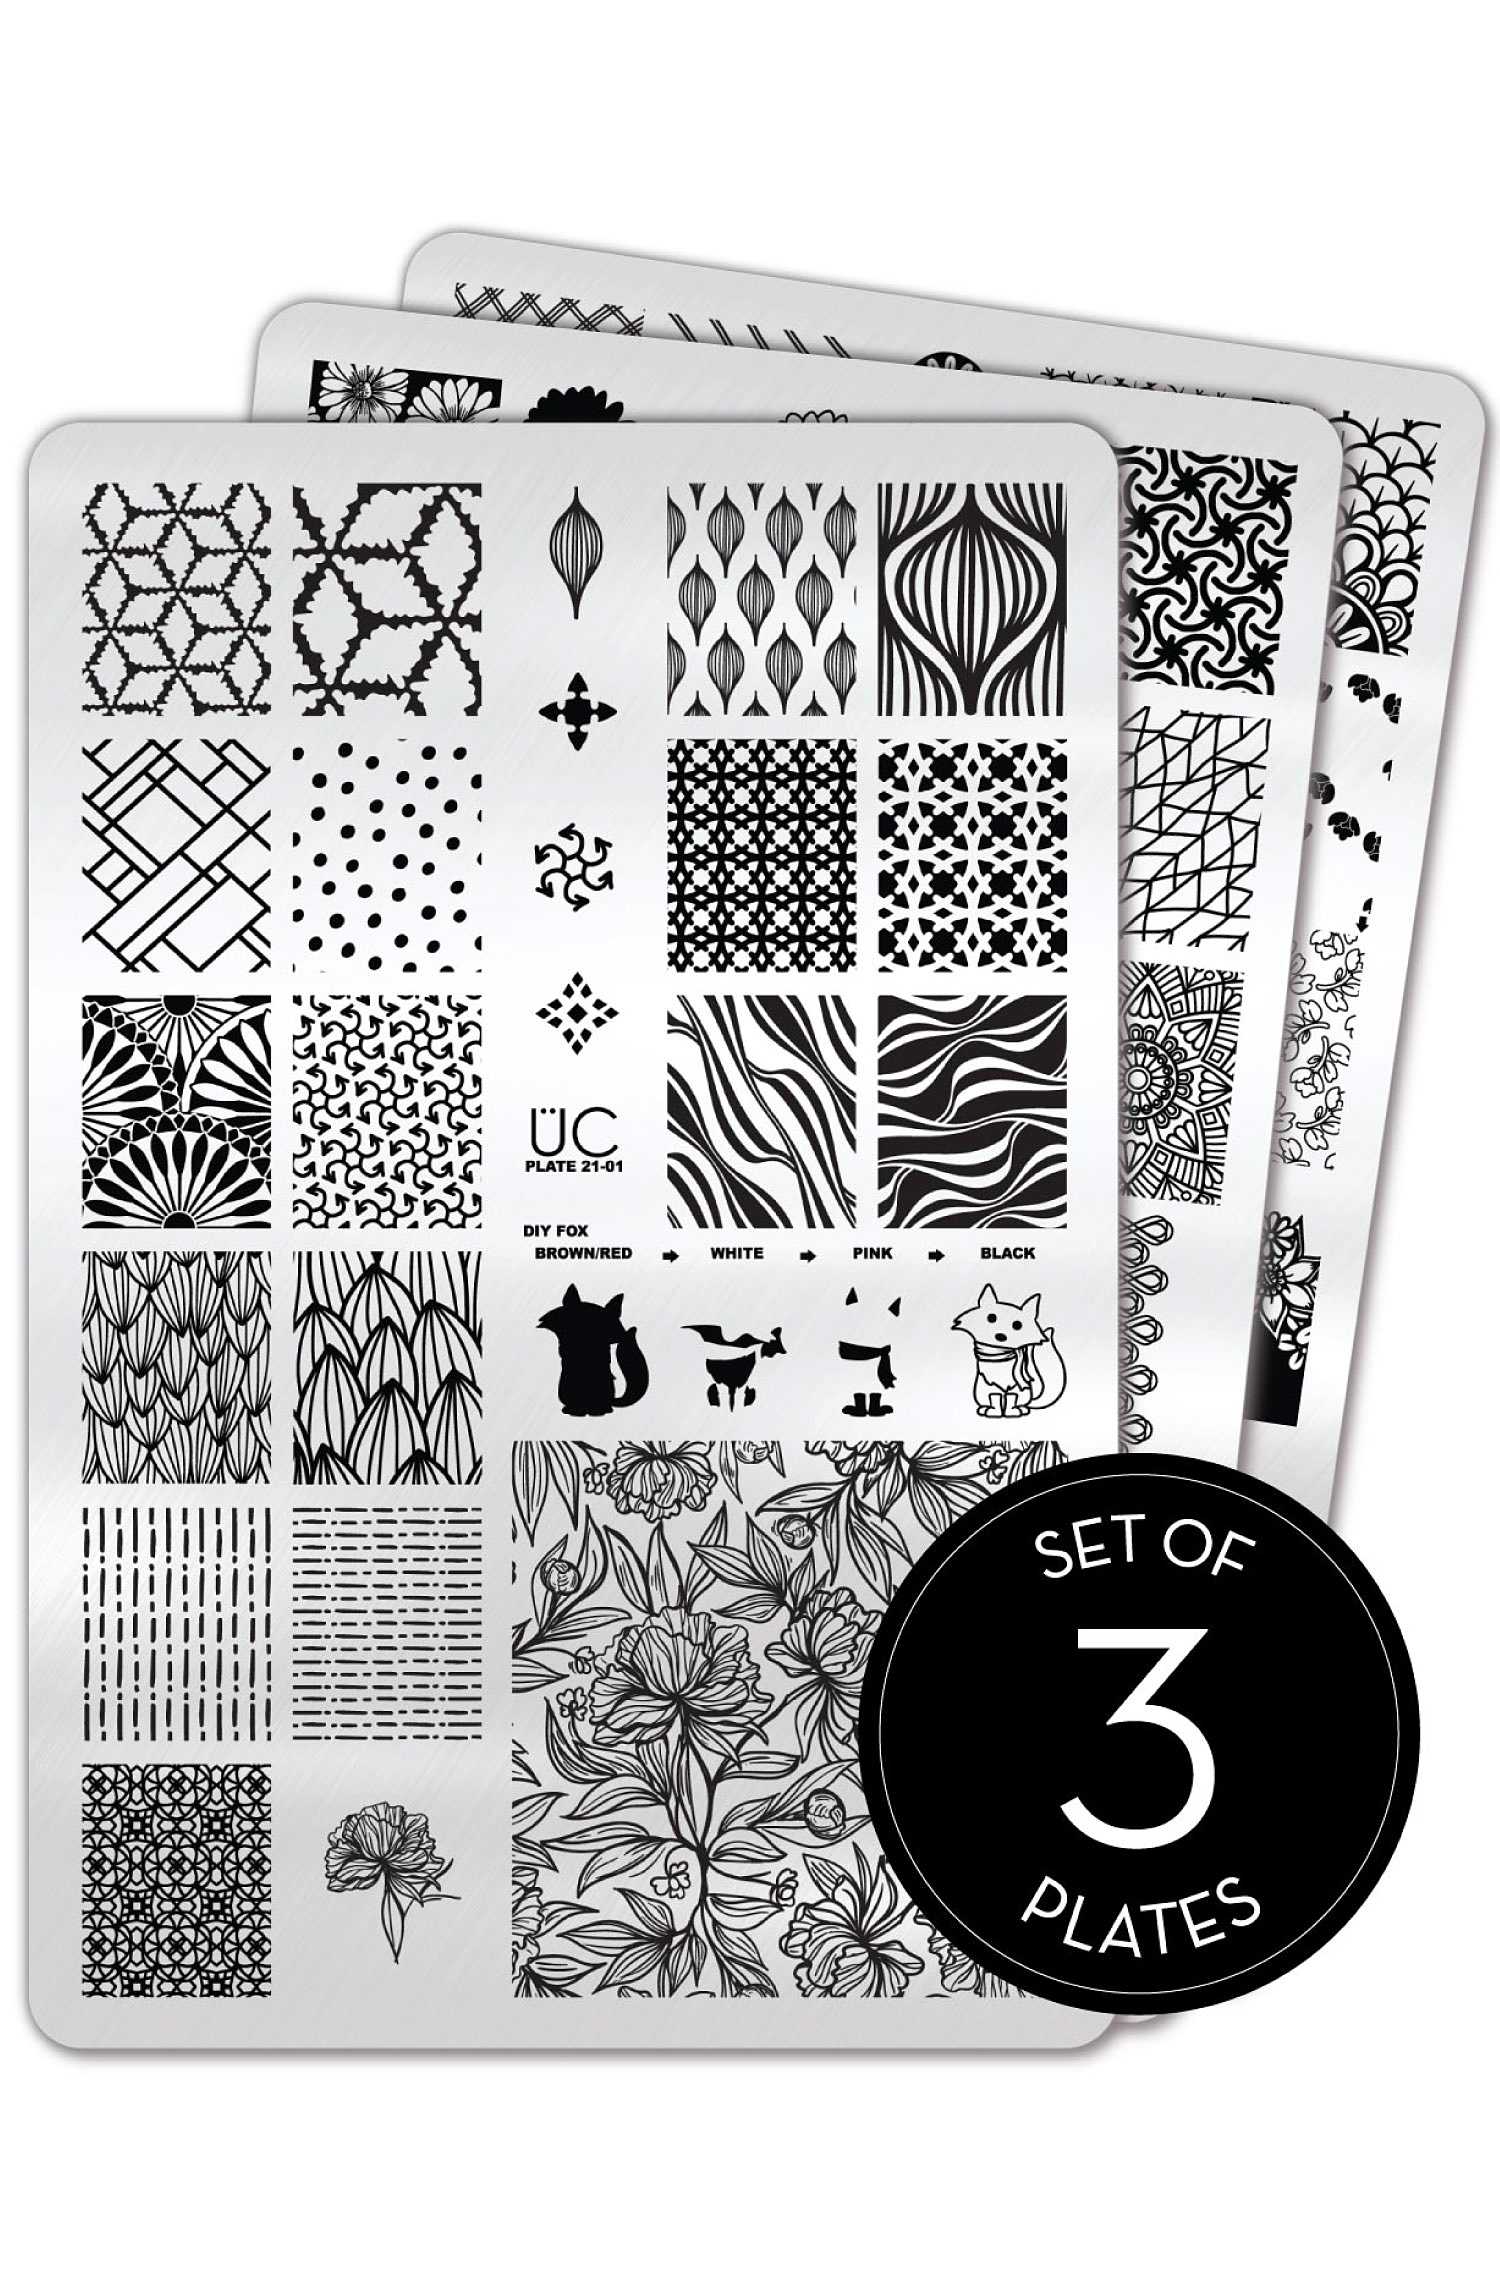 Collection 21 - UberChic Nail Stamping Plates - Includes 3 Unique 